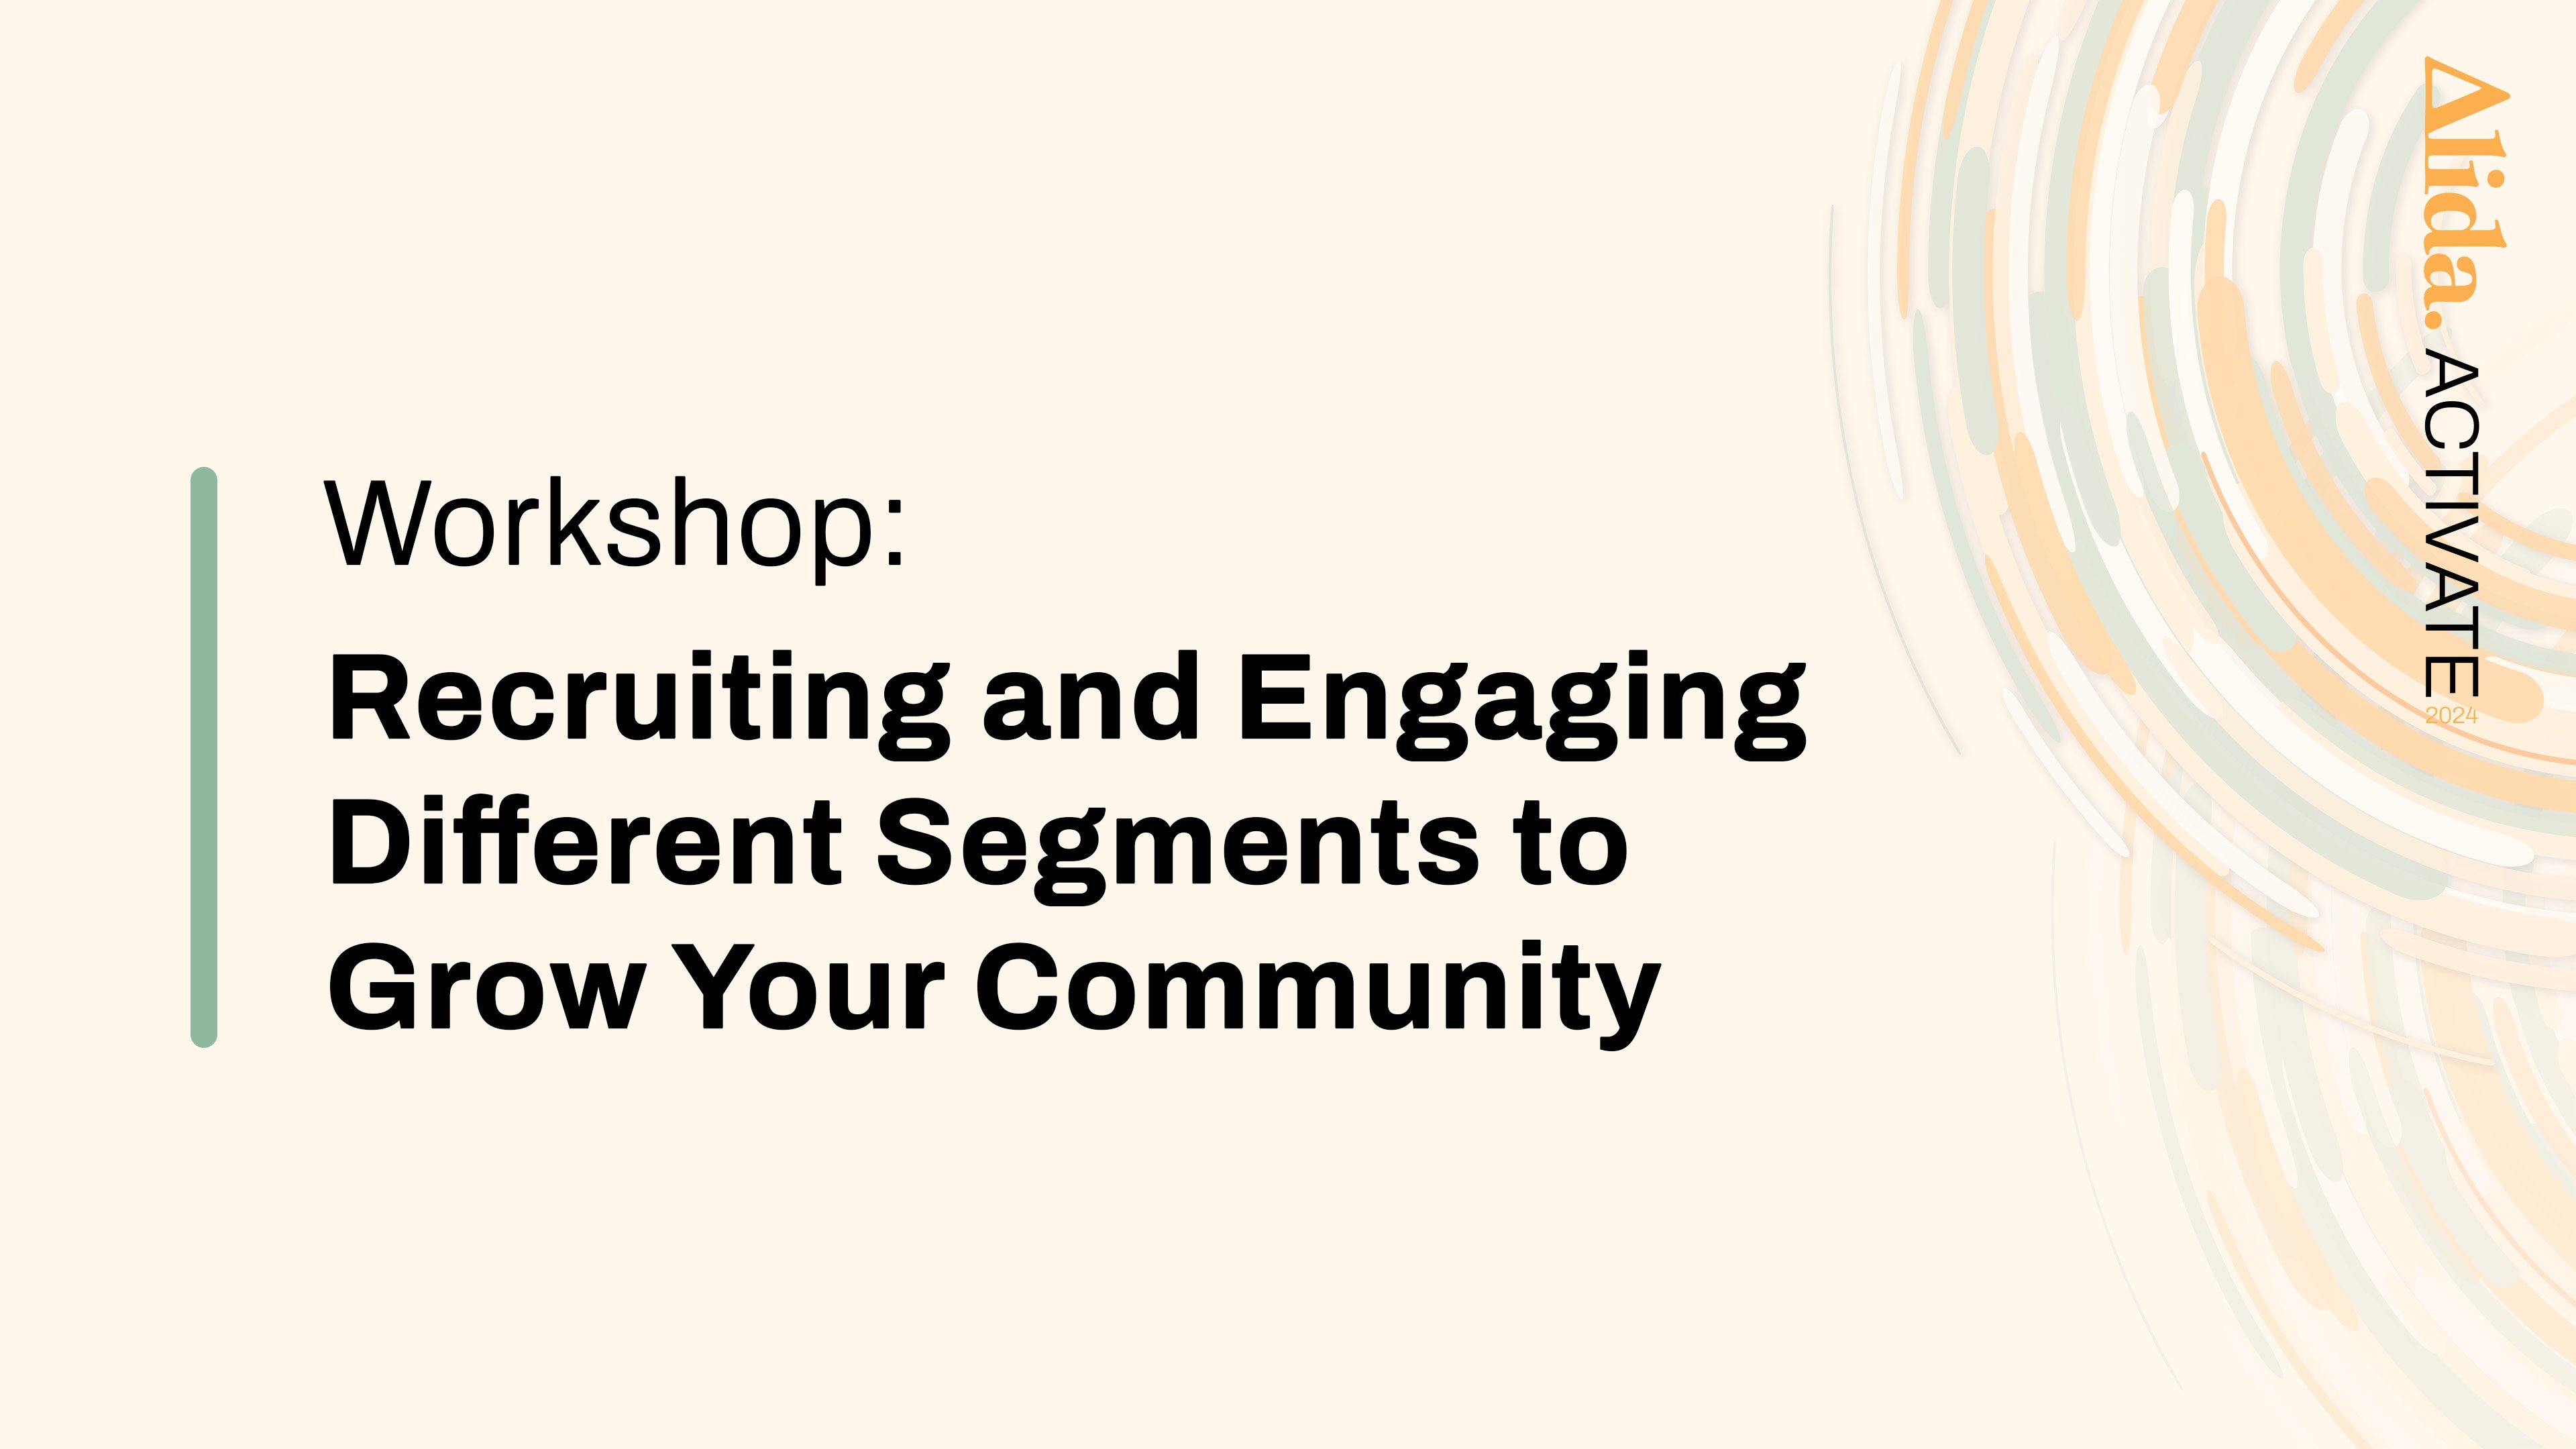 Recruiting and Engaging Different Segments to Grow Your Community@2x